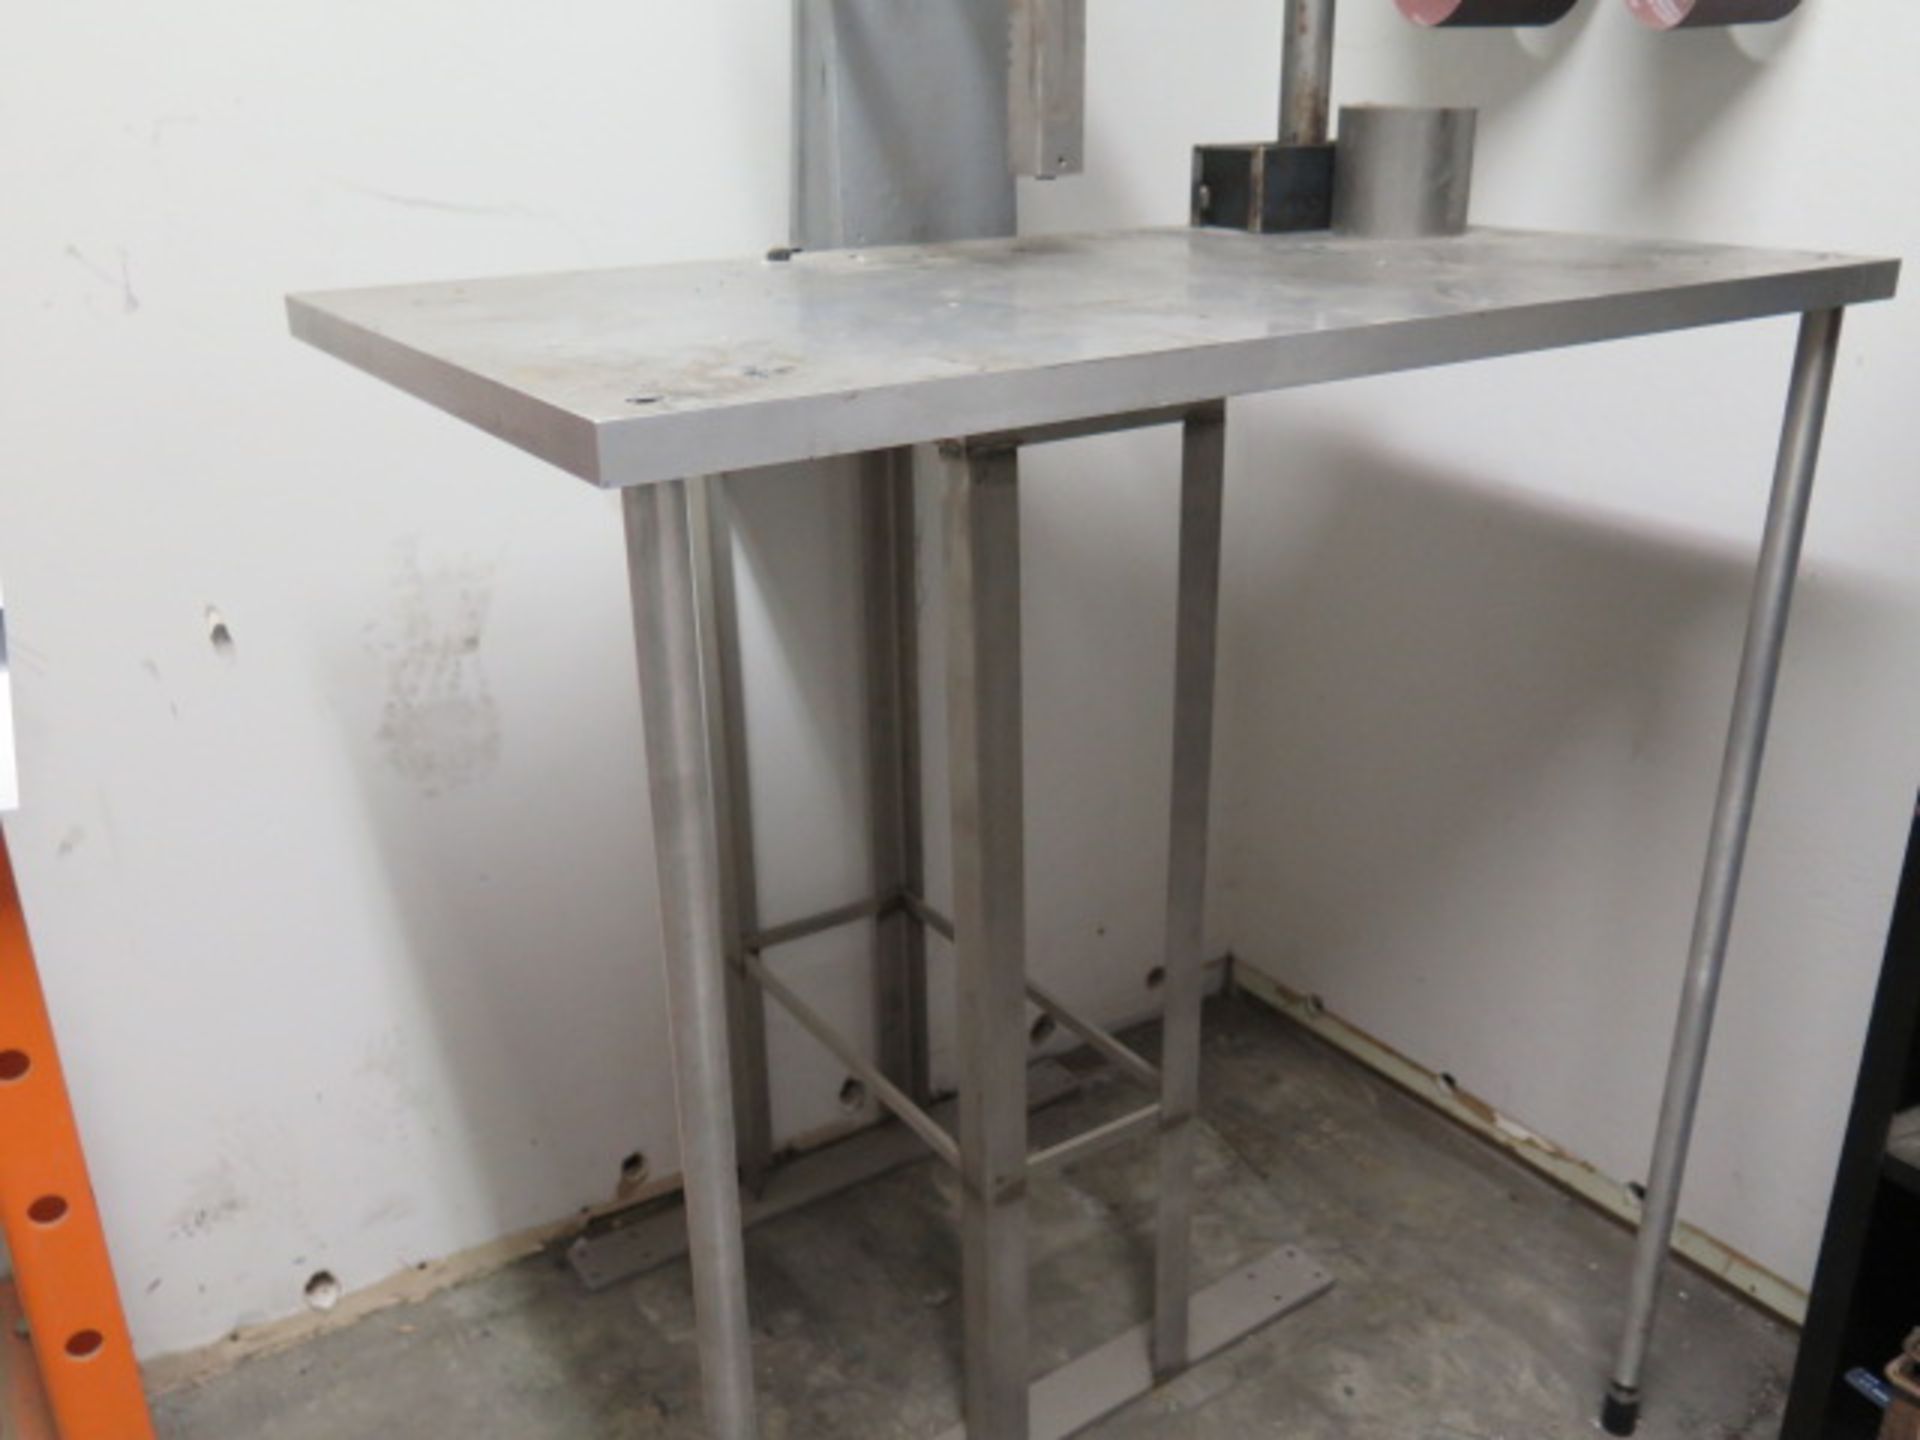 Arbor Press w/ Stand and Table (SOLD AS-IS - NO WARRANTY) - Image 5 of 6